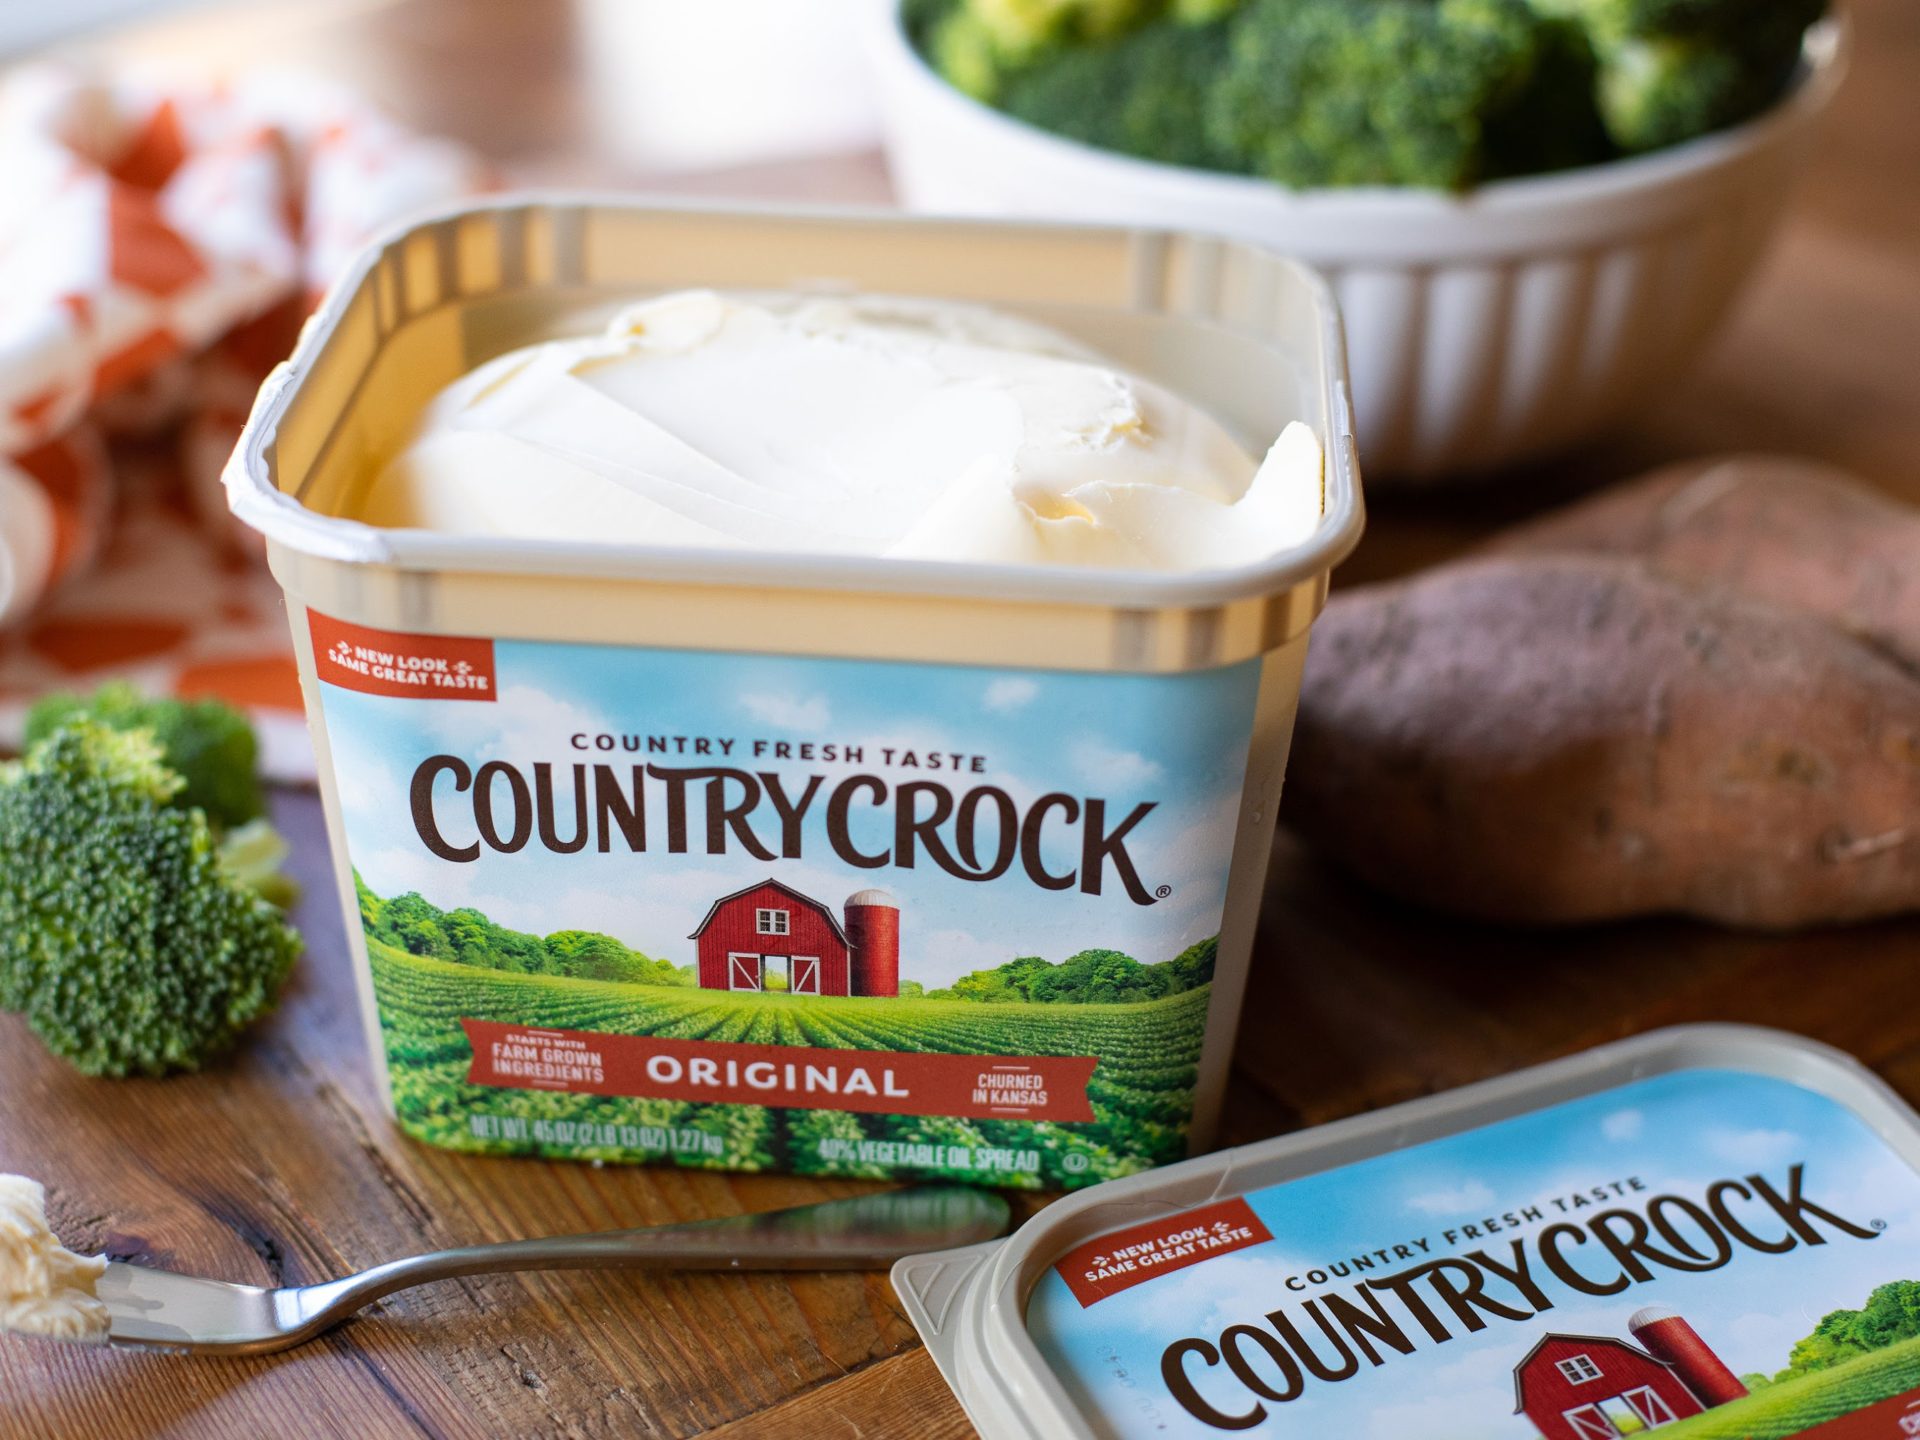 Big Tubs Of Country Crock Spread As Low As $4.99 At Kroger